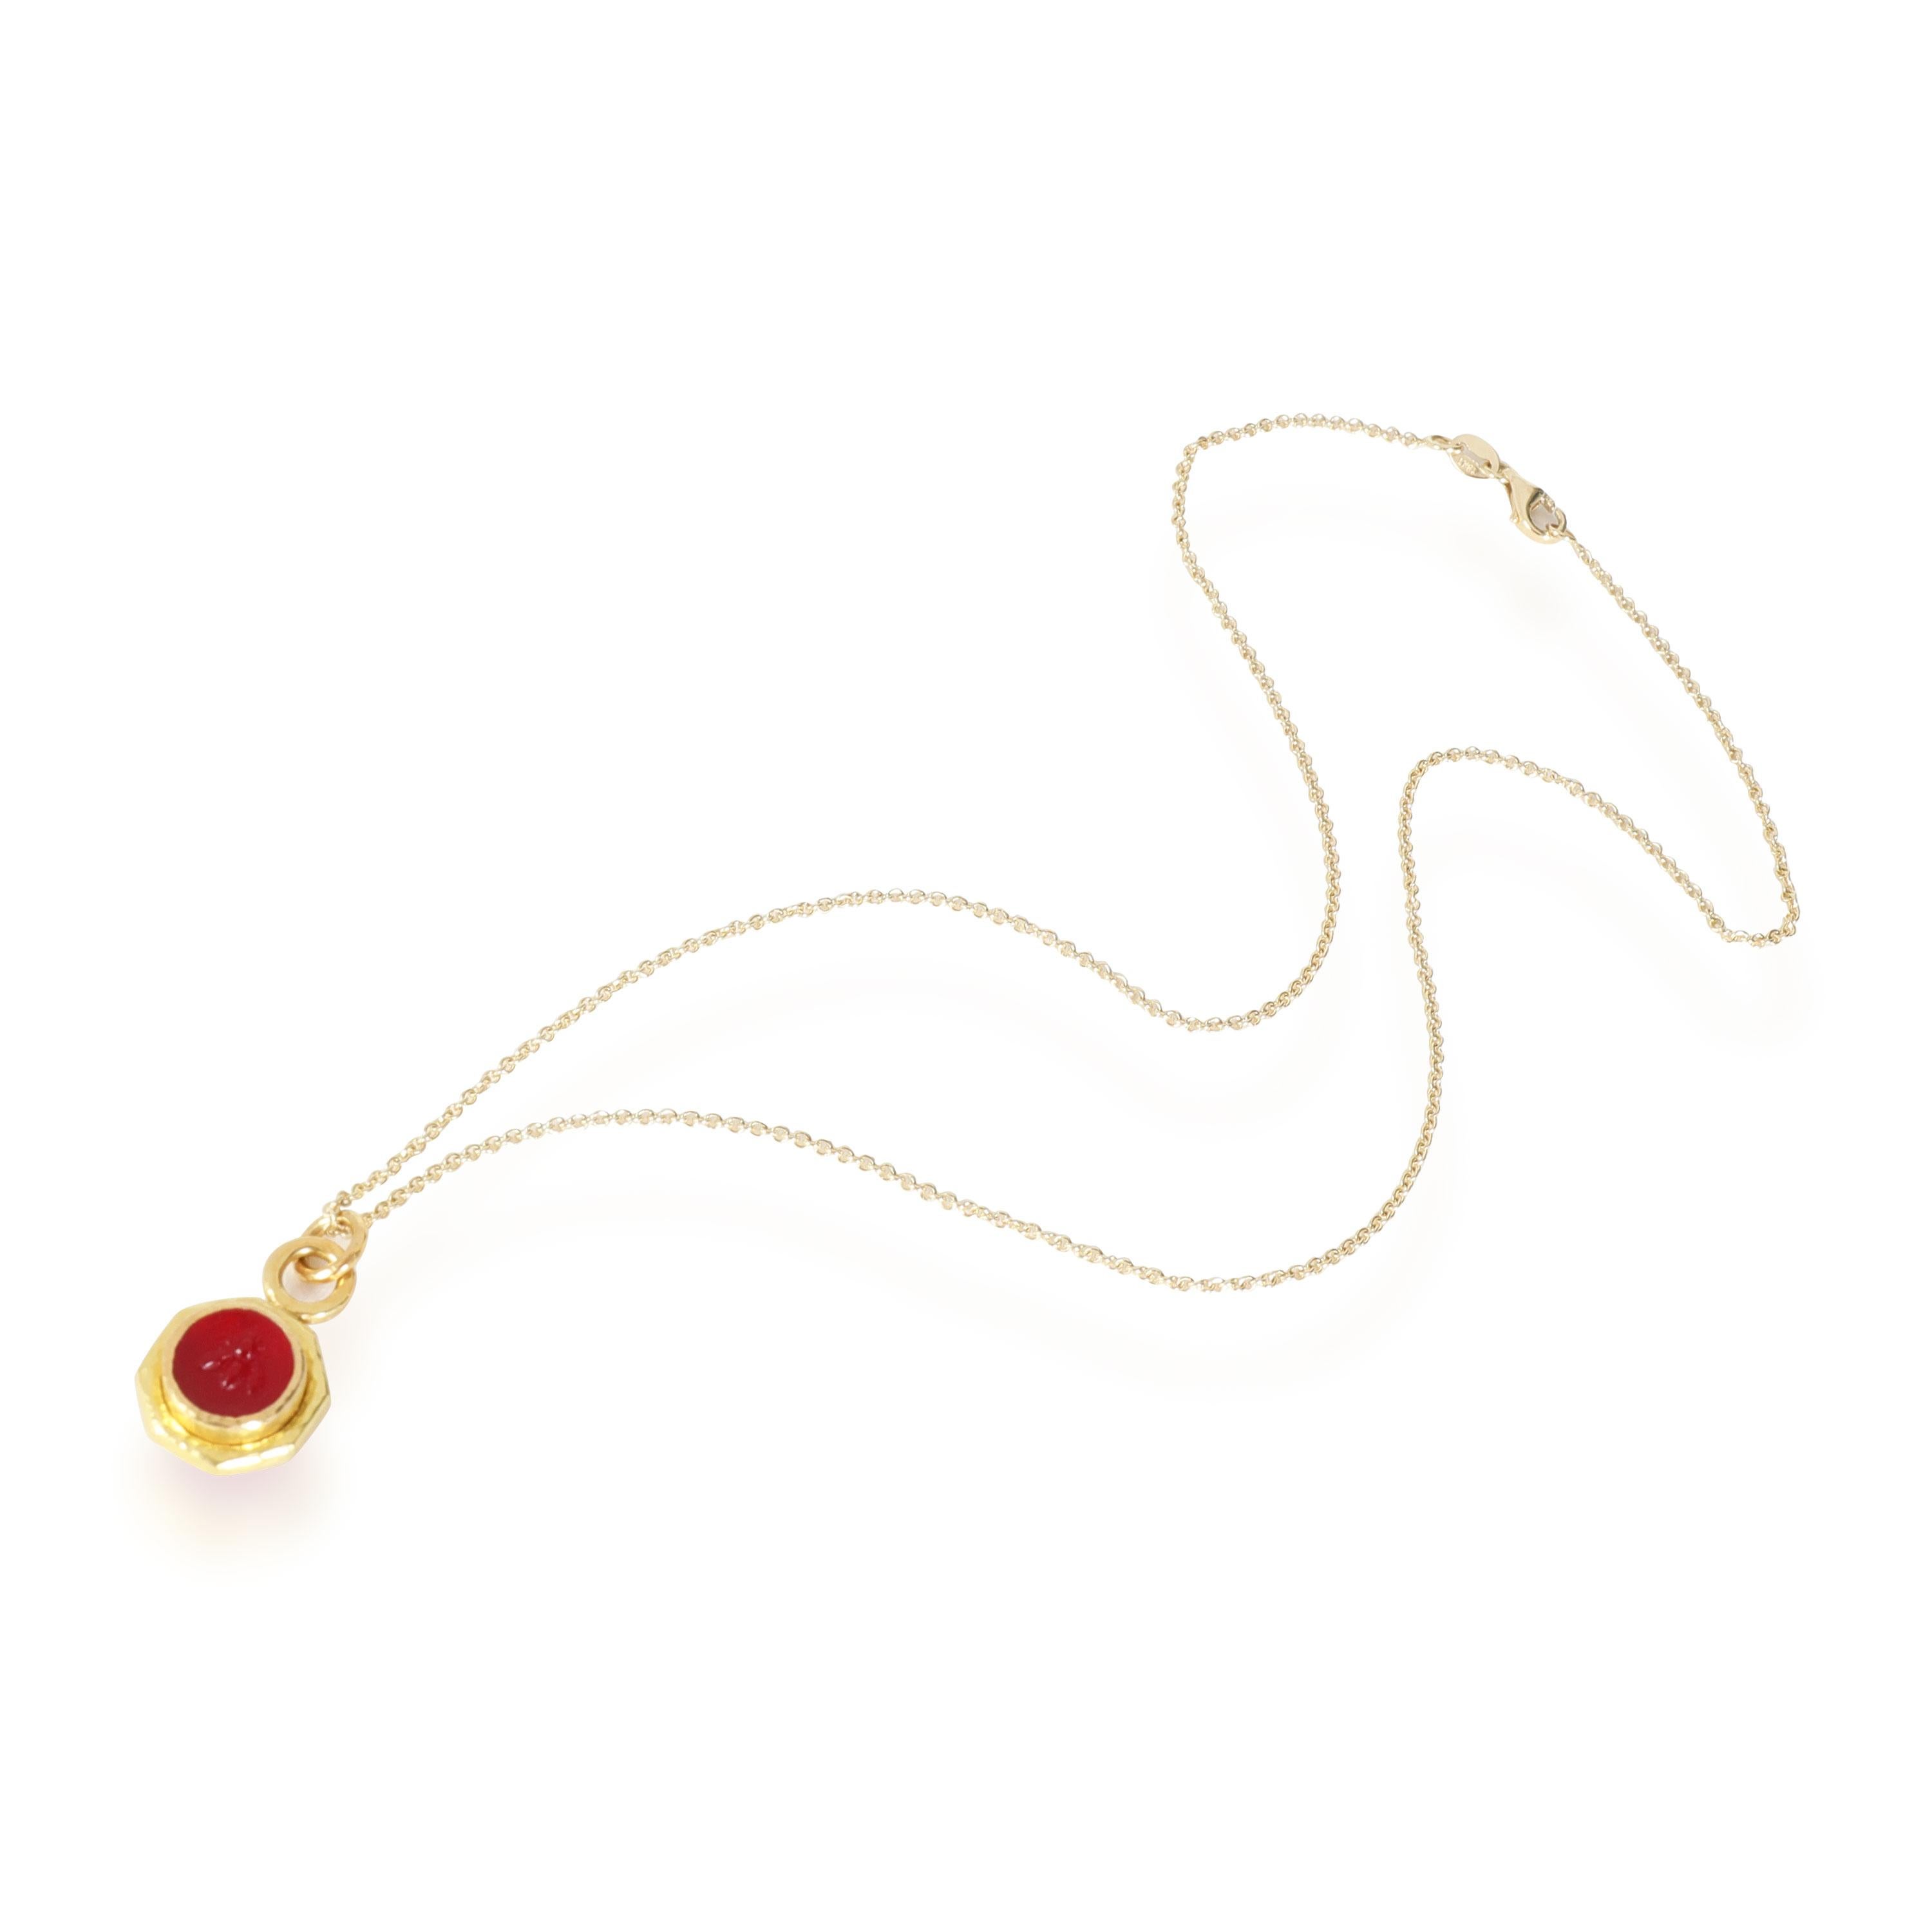 Elizabeth Locke Red Glass & Mother of Pearl Pendant in 18K Yellow Gold

PRIMARY DETAILS
SKU: 115175
Listing Title: Elizabeth Locke Red Glass & Mother of Pearl Pendant in 18K Yellow Gold
Condition Description: Retails for 3500 USD. In excellent